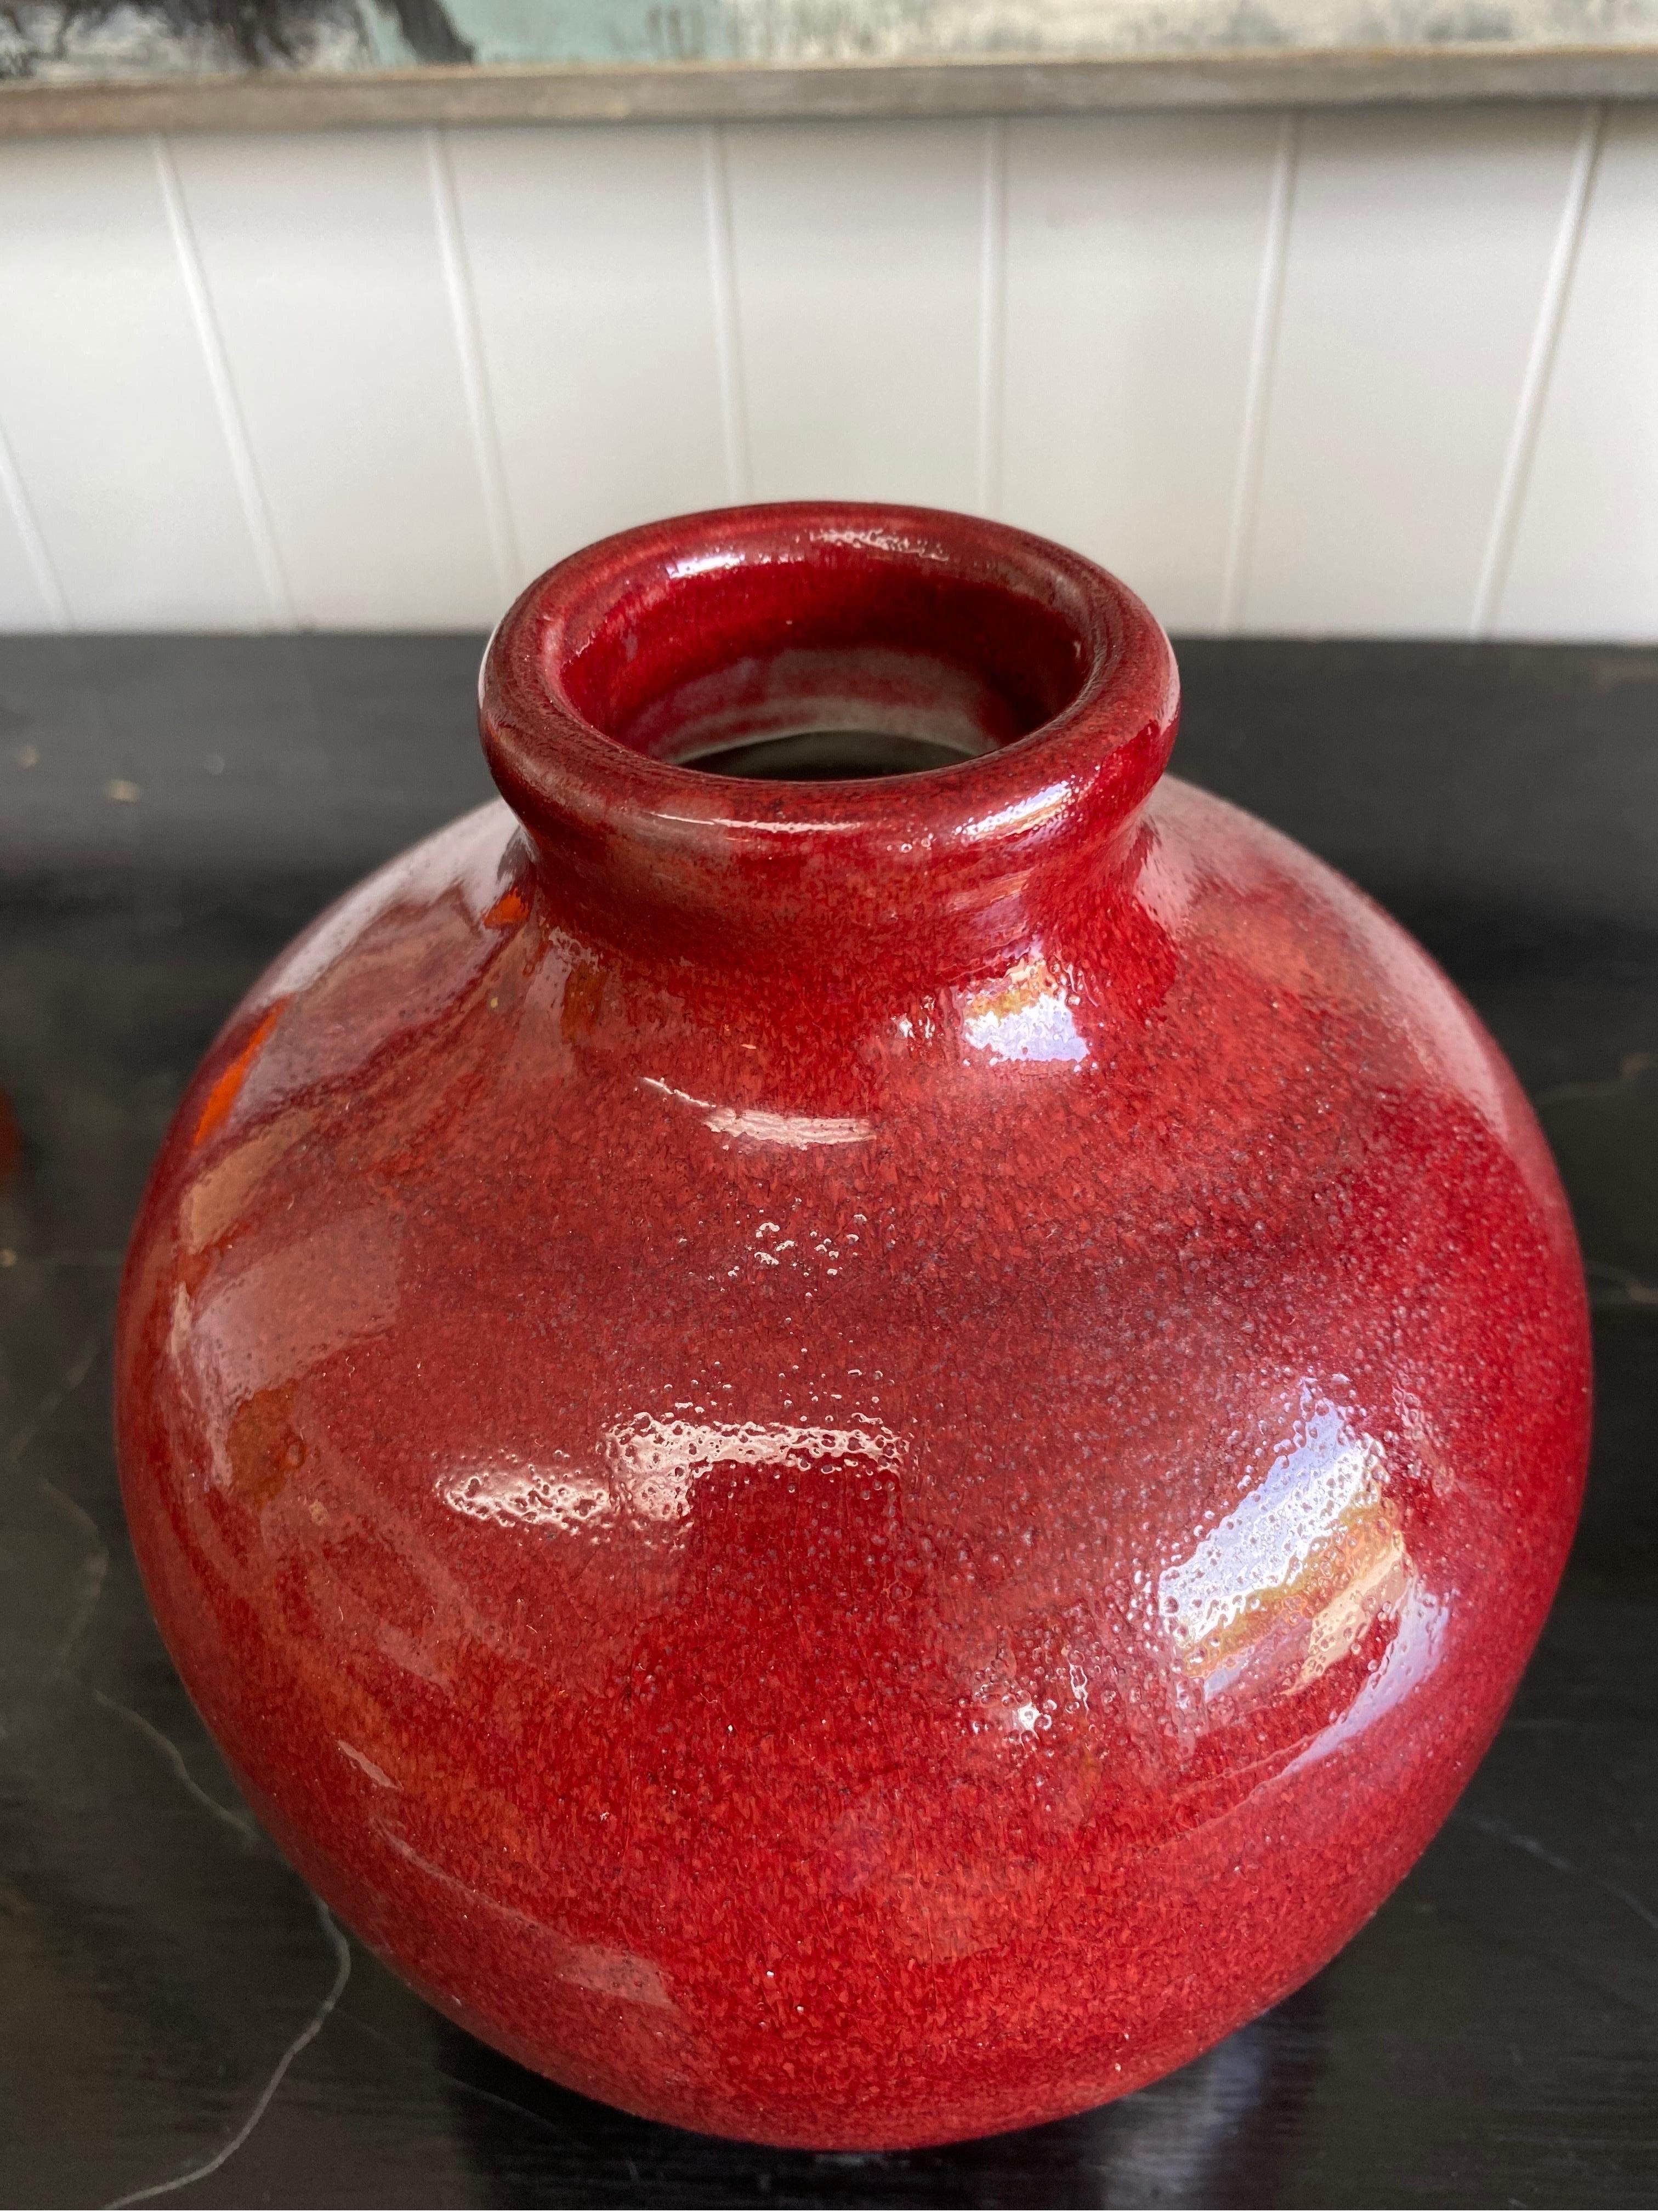 Beautiful ceramic vase by Texas ceramist Harding Black, signed and dated 1984. Self-taught Harding Black was known for his extensive glaze research and techniques. This pottery piece is a deep red. No chips and in great vintage condition.